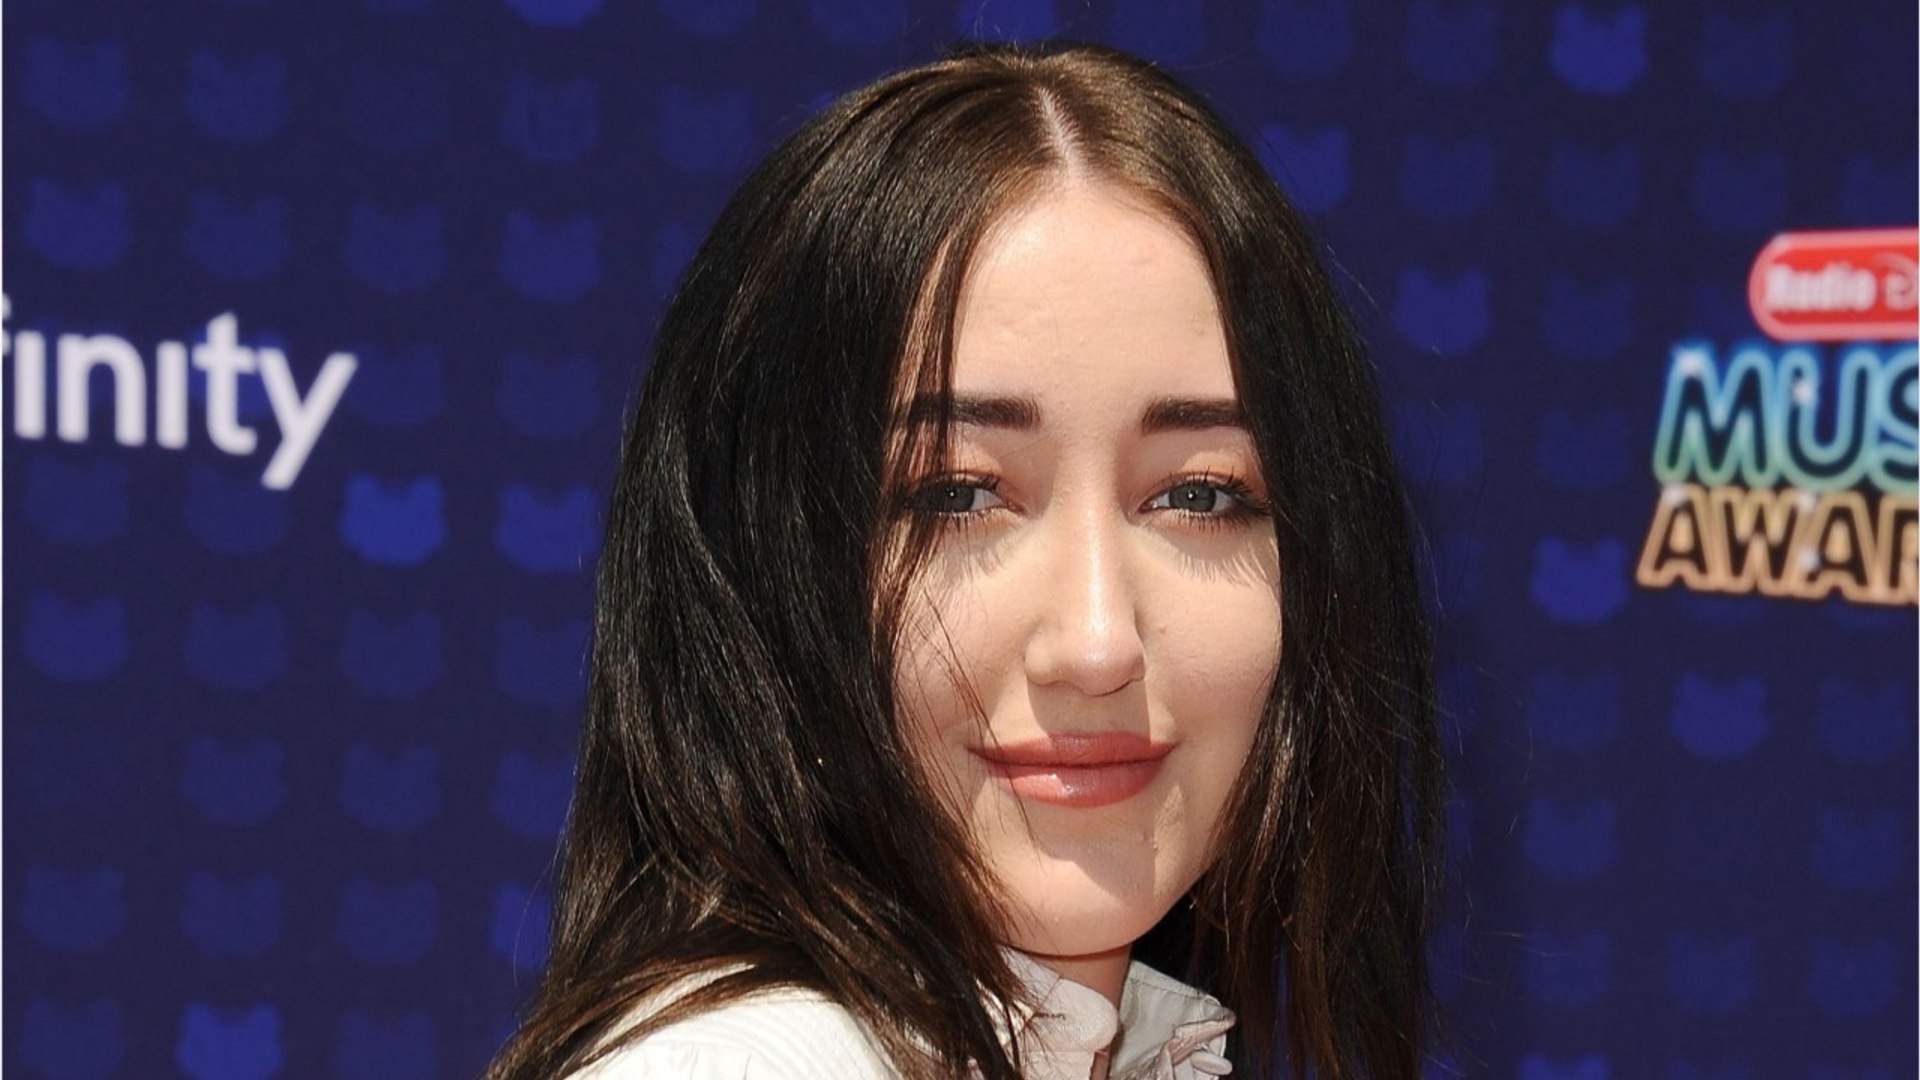 Noah Cyrus Gives Shout Out To Dad